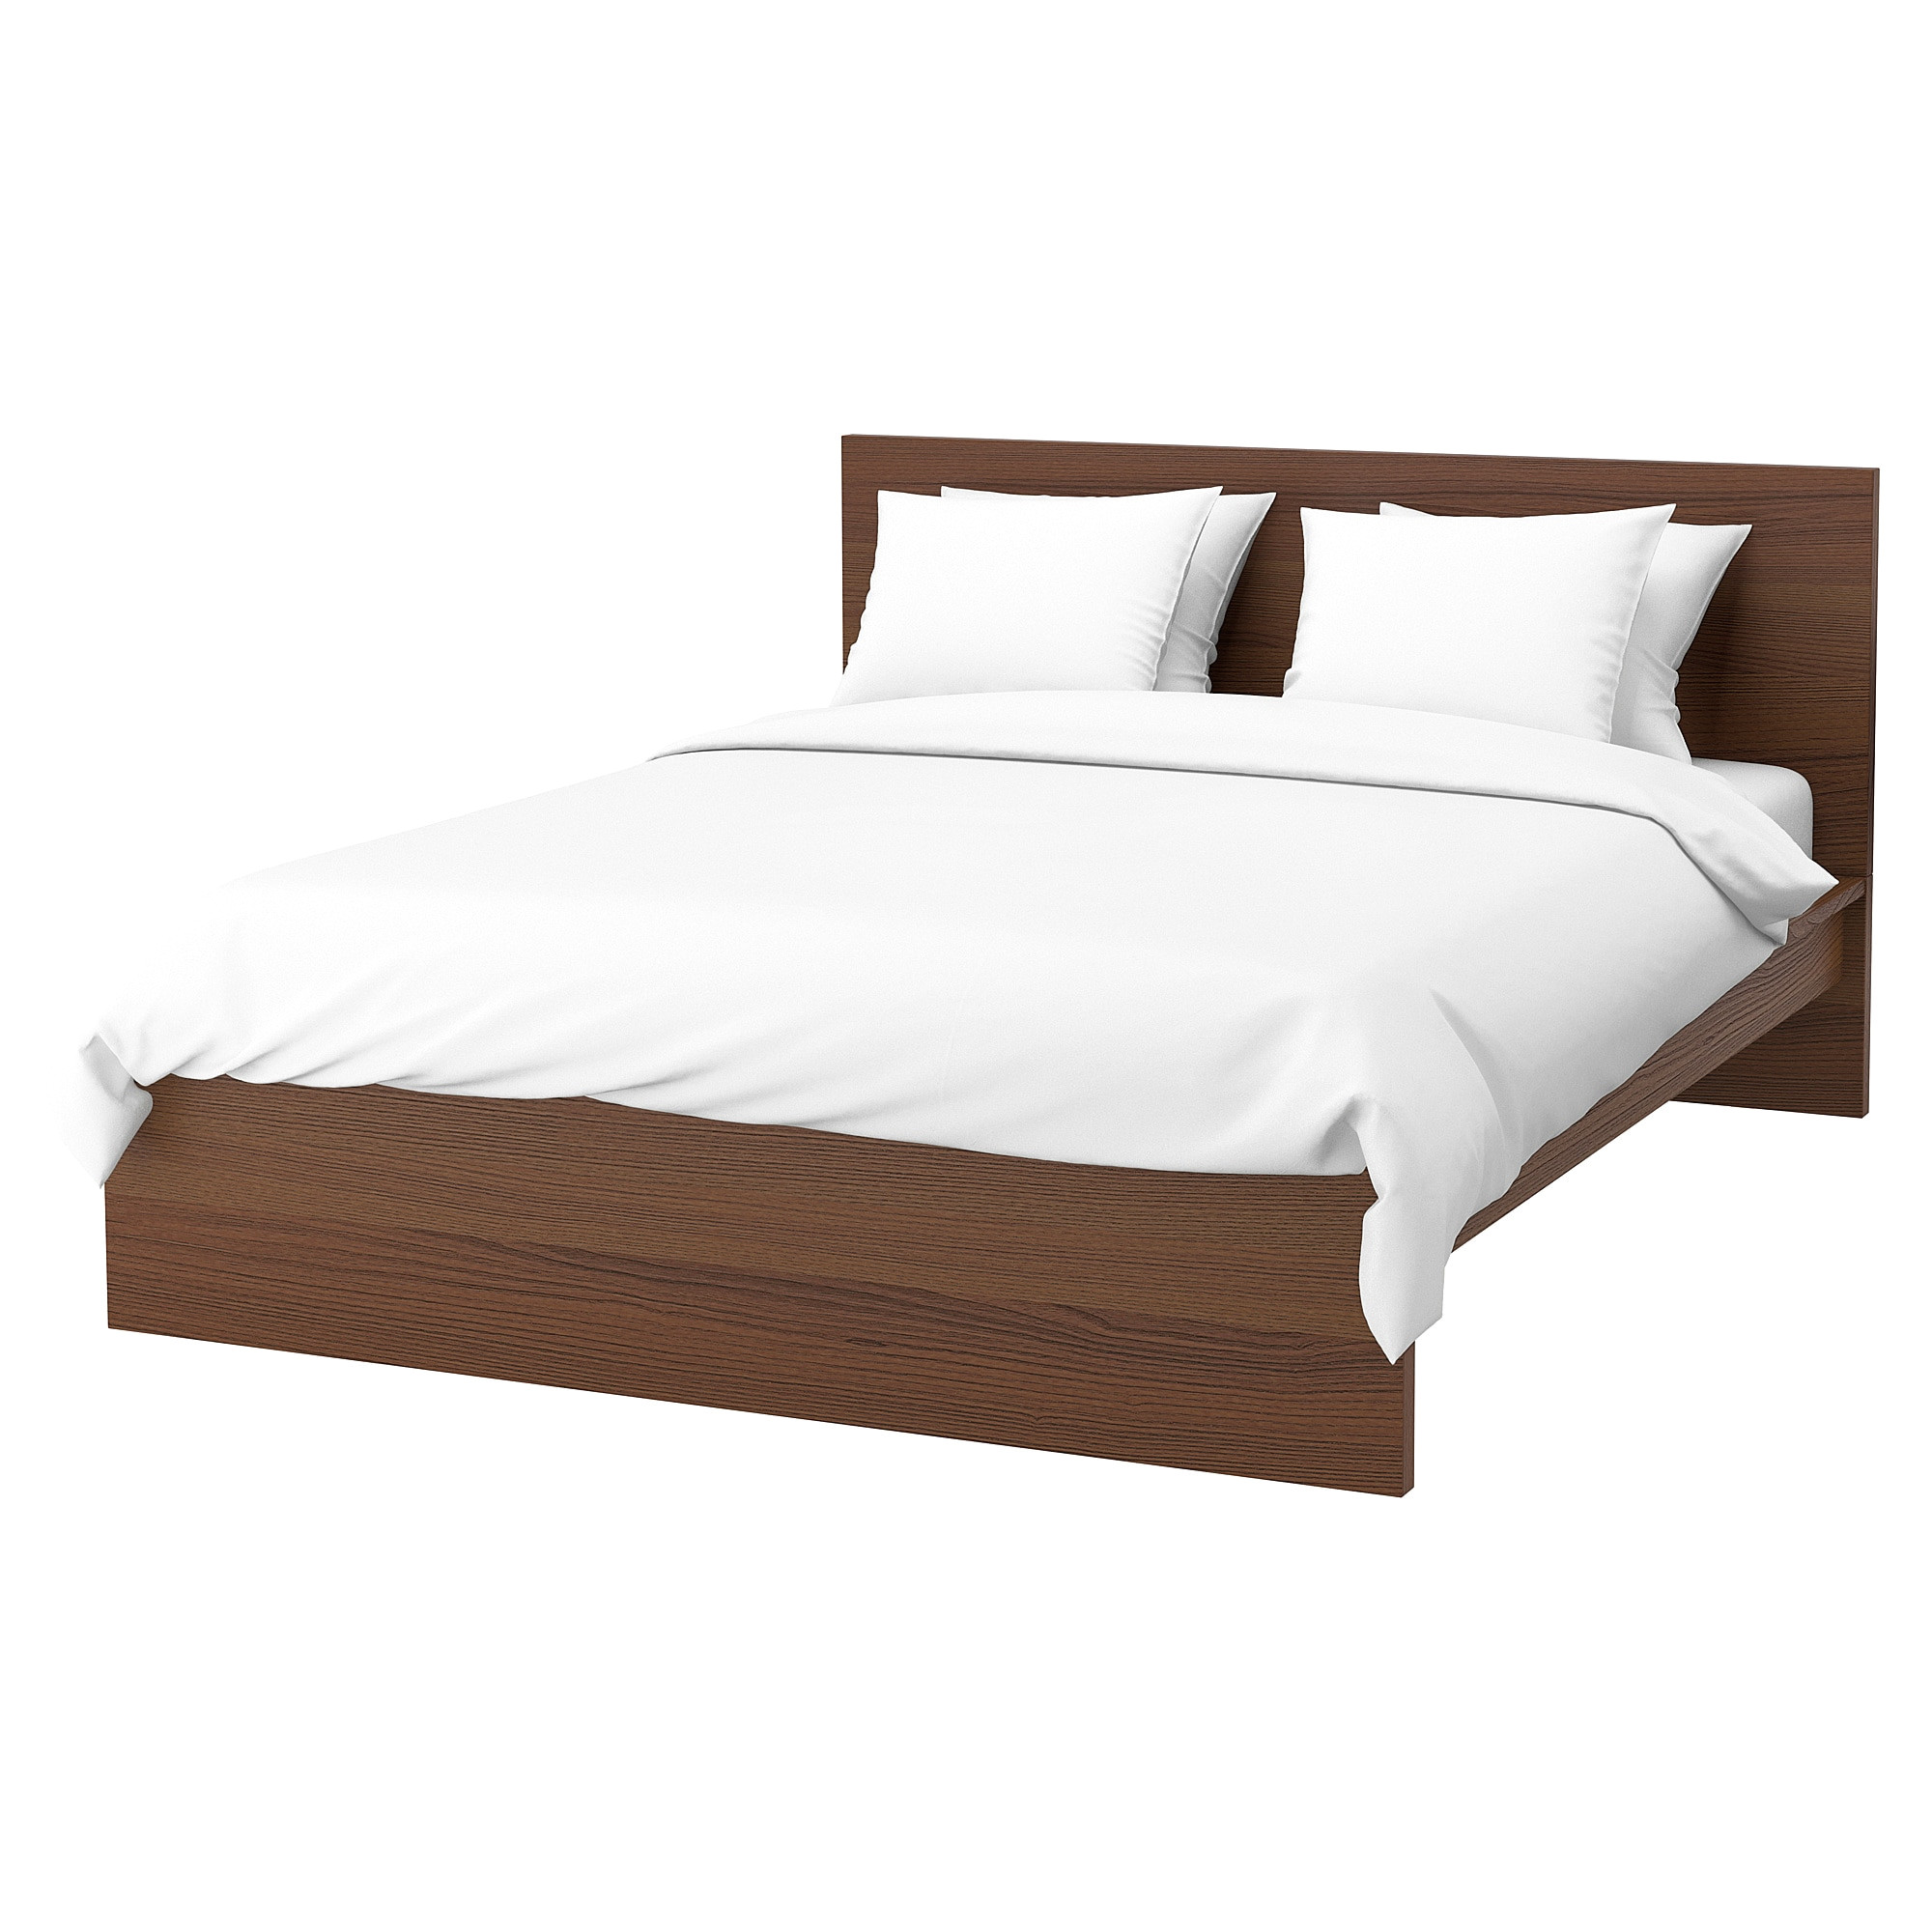 ikea malm bed frame high real wood veneer will make this bed age gracefully